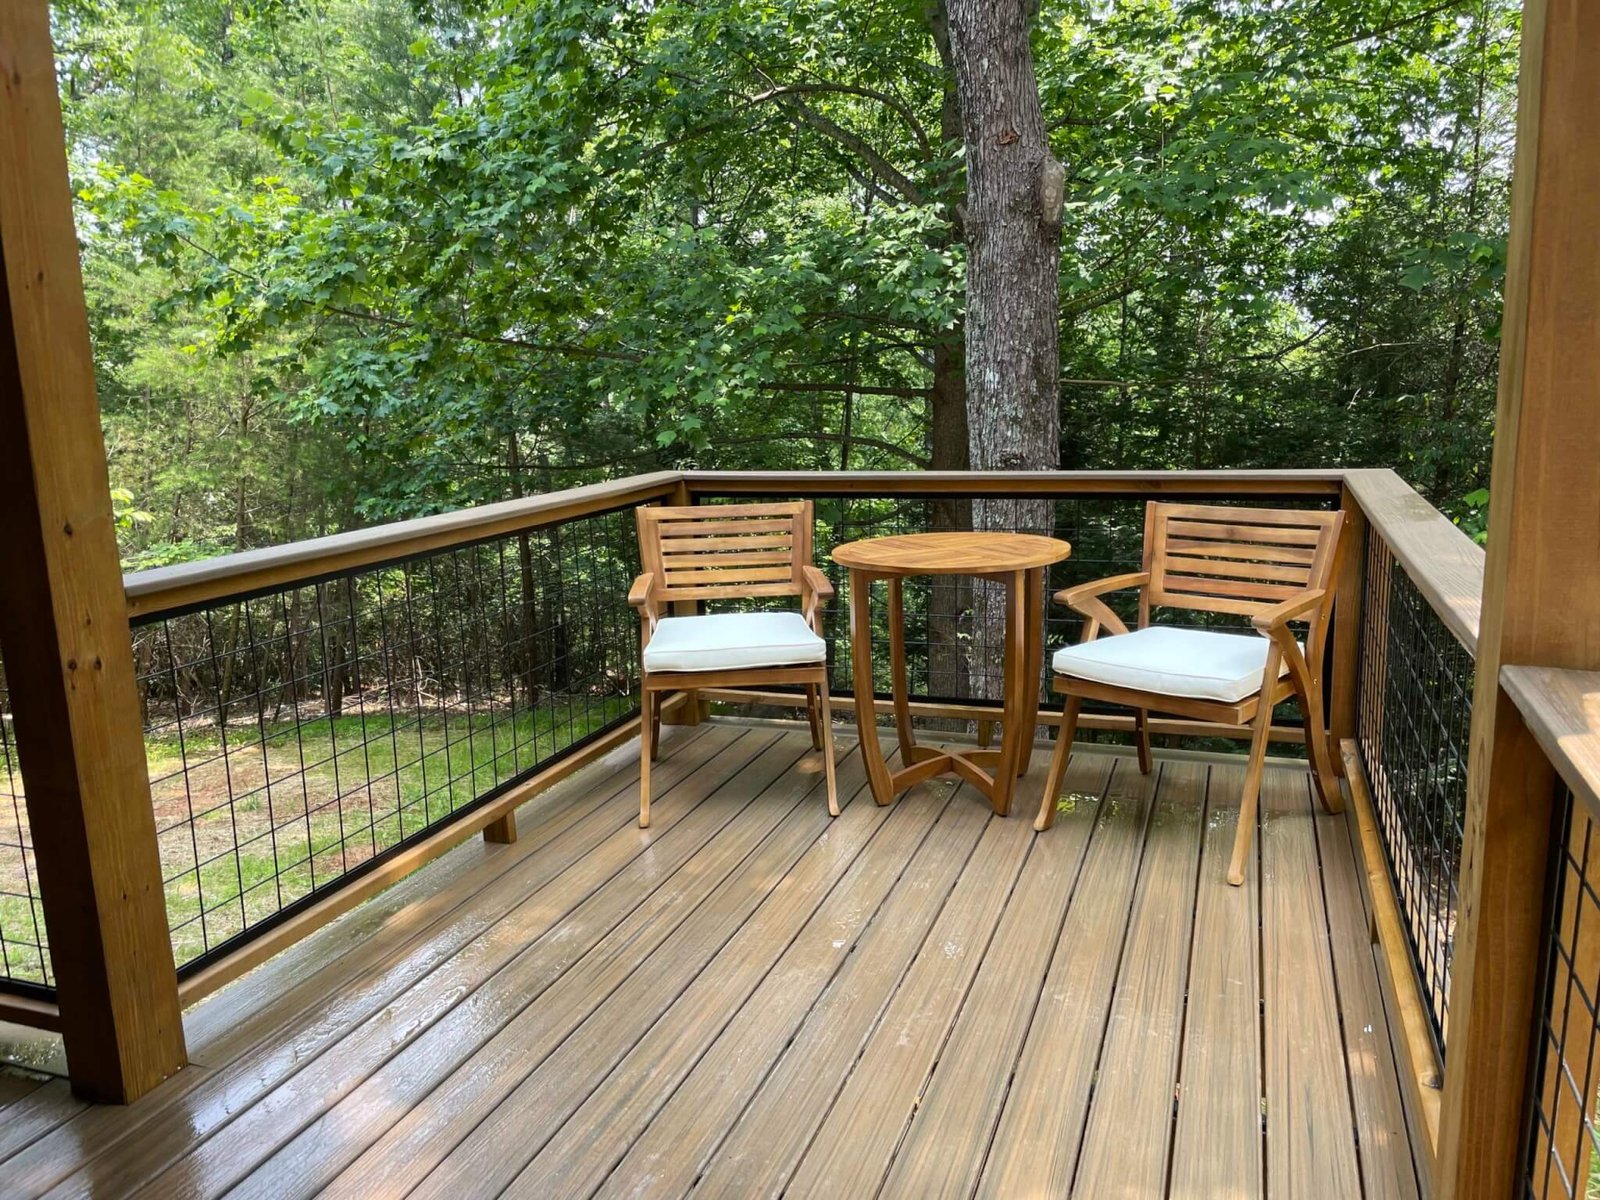 Alfresco dining on the extended deck that is open-air surrounded by nature.